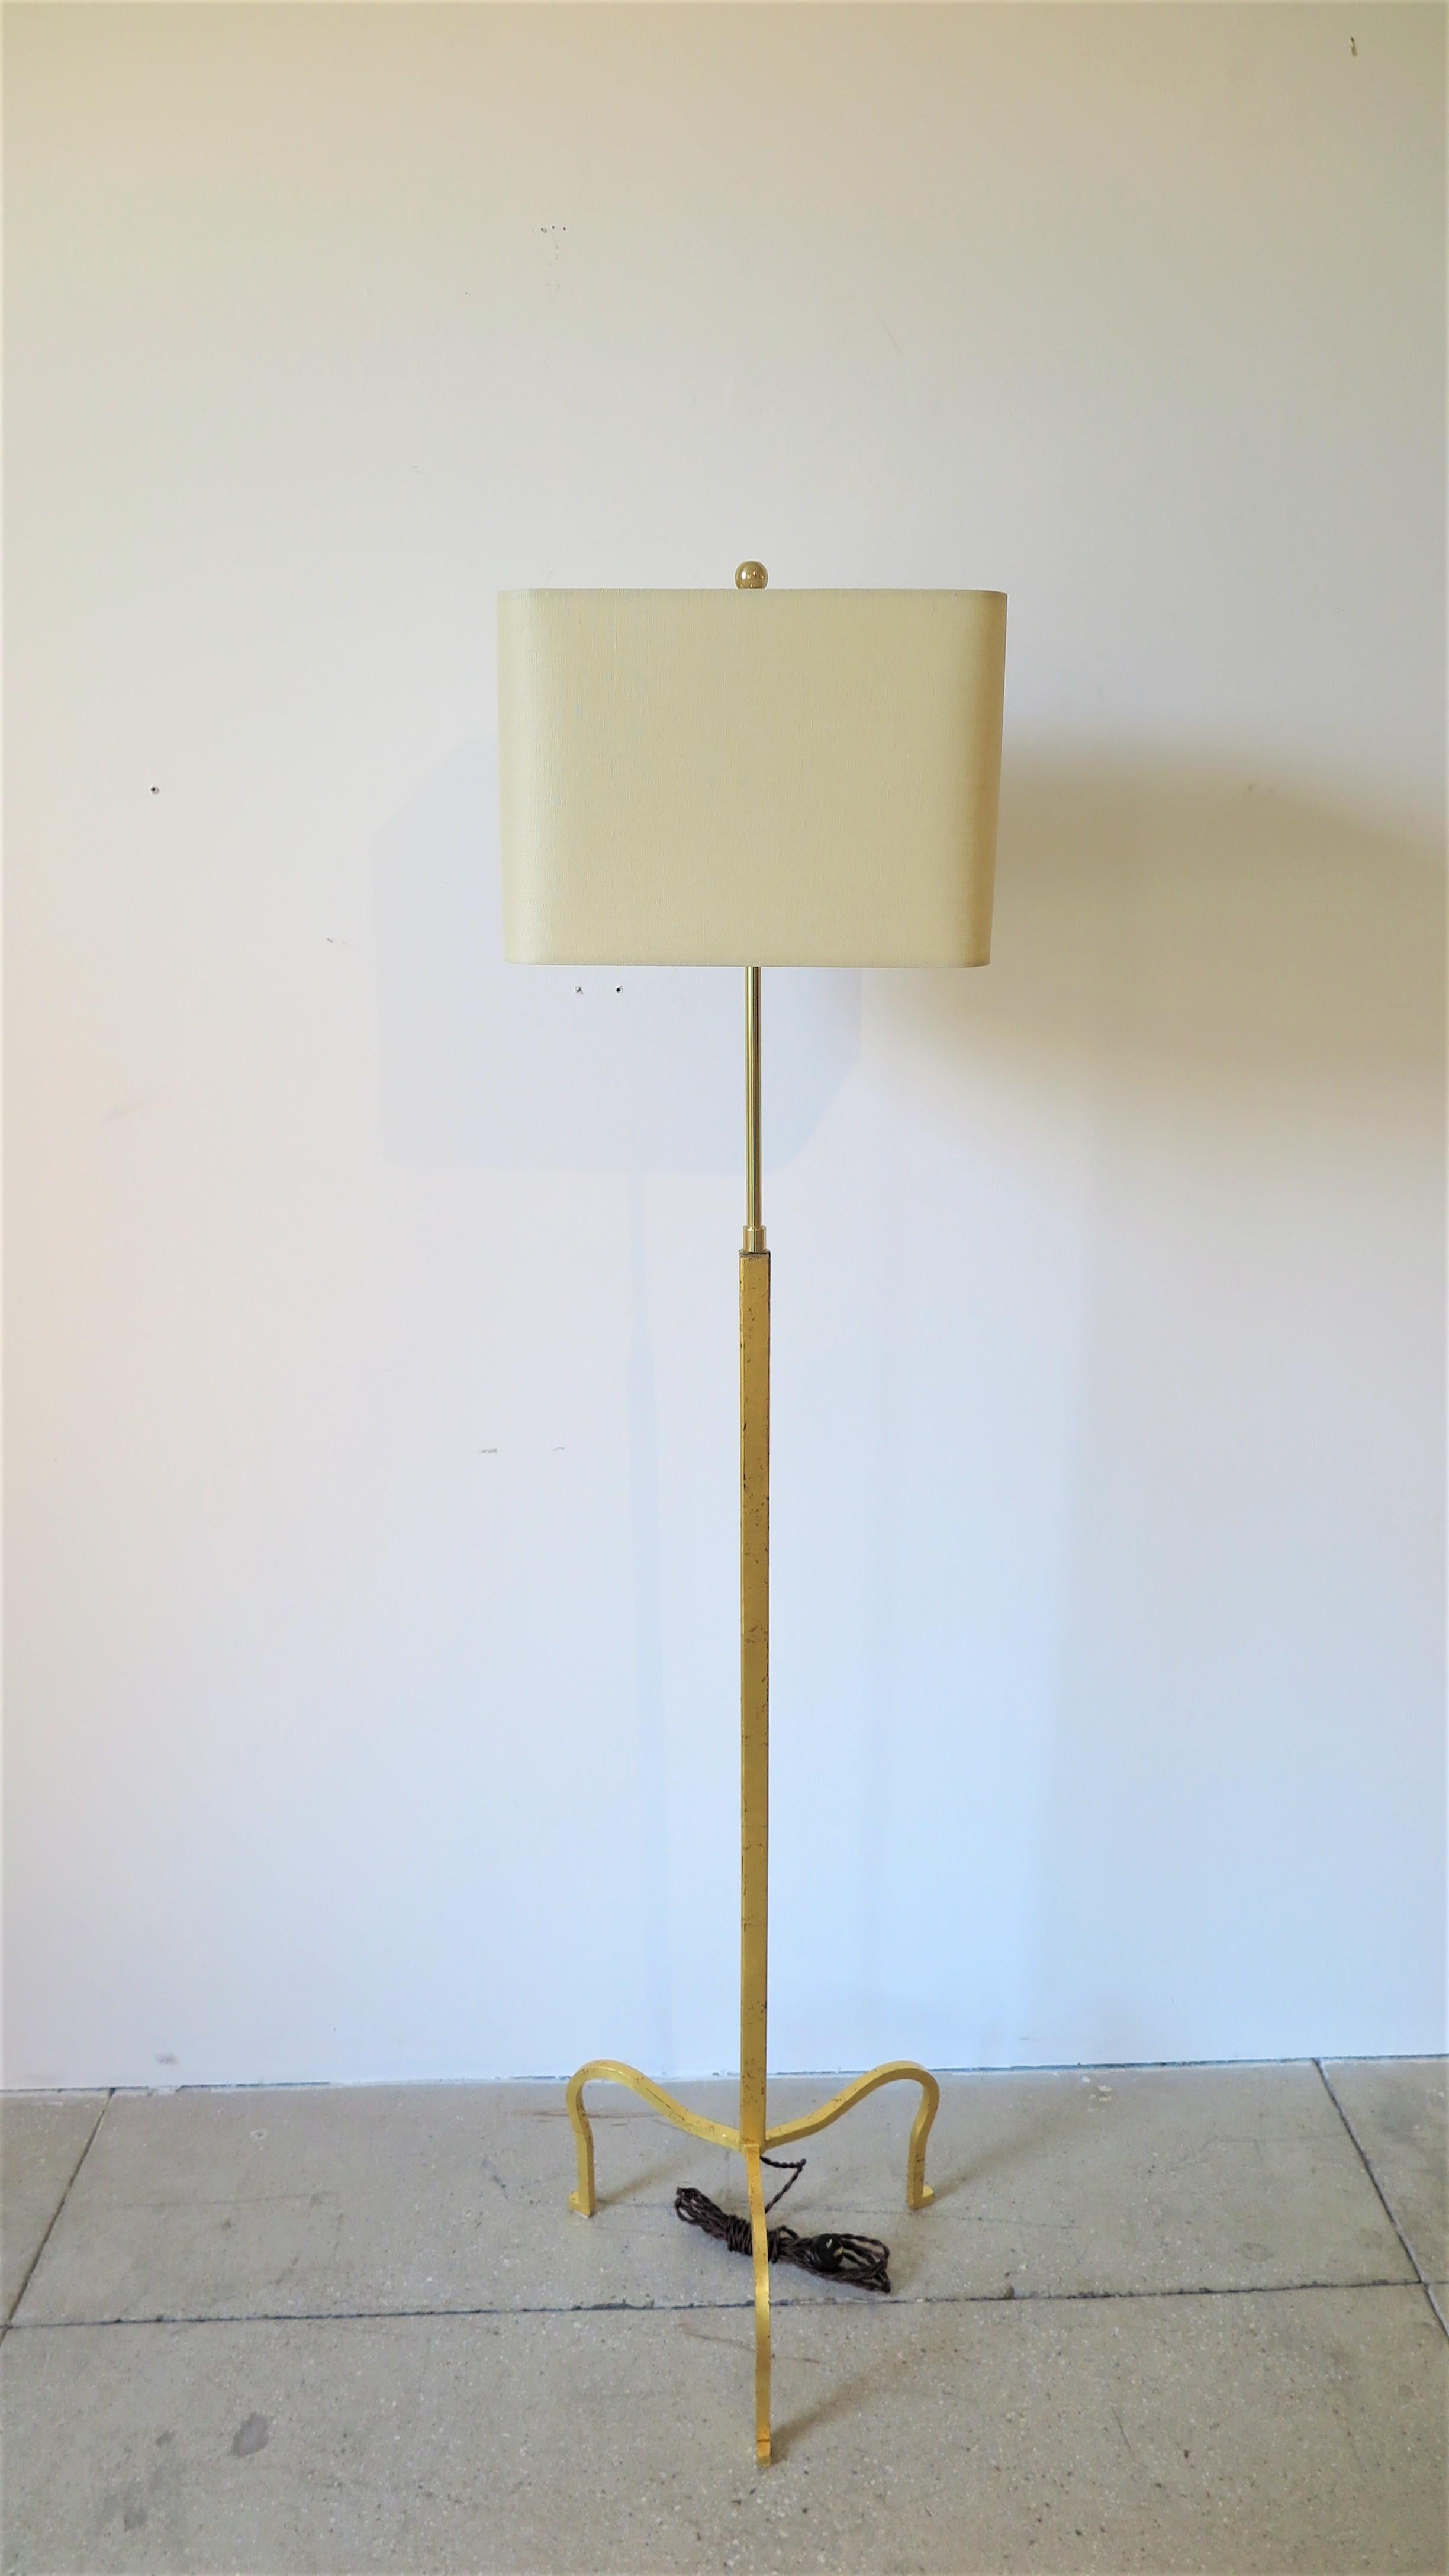 Albert Hadley Gilded Floor Lamp.  Tripod adjustable 24-karat gold leaf gilded floor lamp designed by Albert Hadley and Pairish Hadley Design. Pair available. These uncompleted Lamps where recovered from the closing of the metal fabricators. The